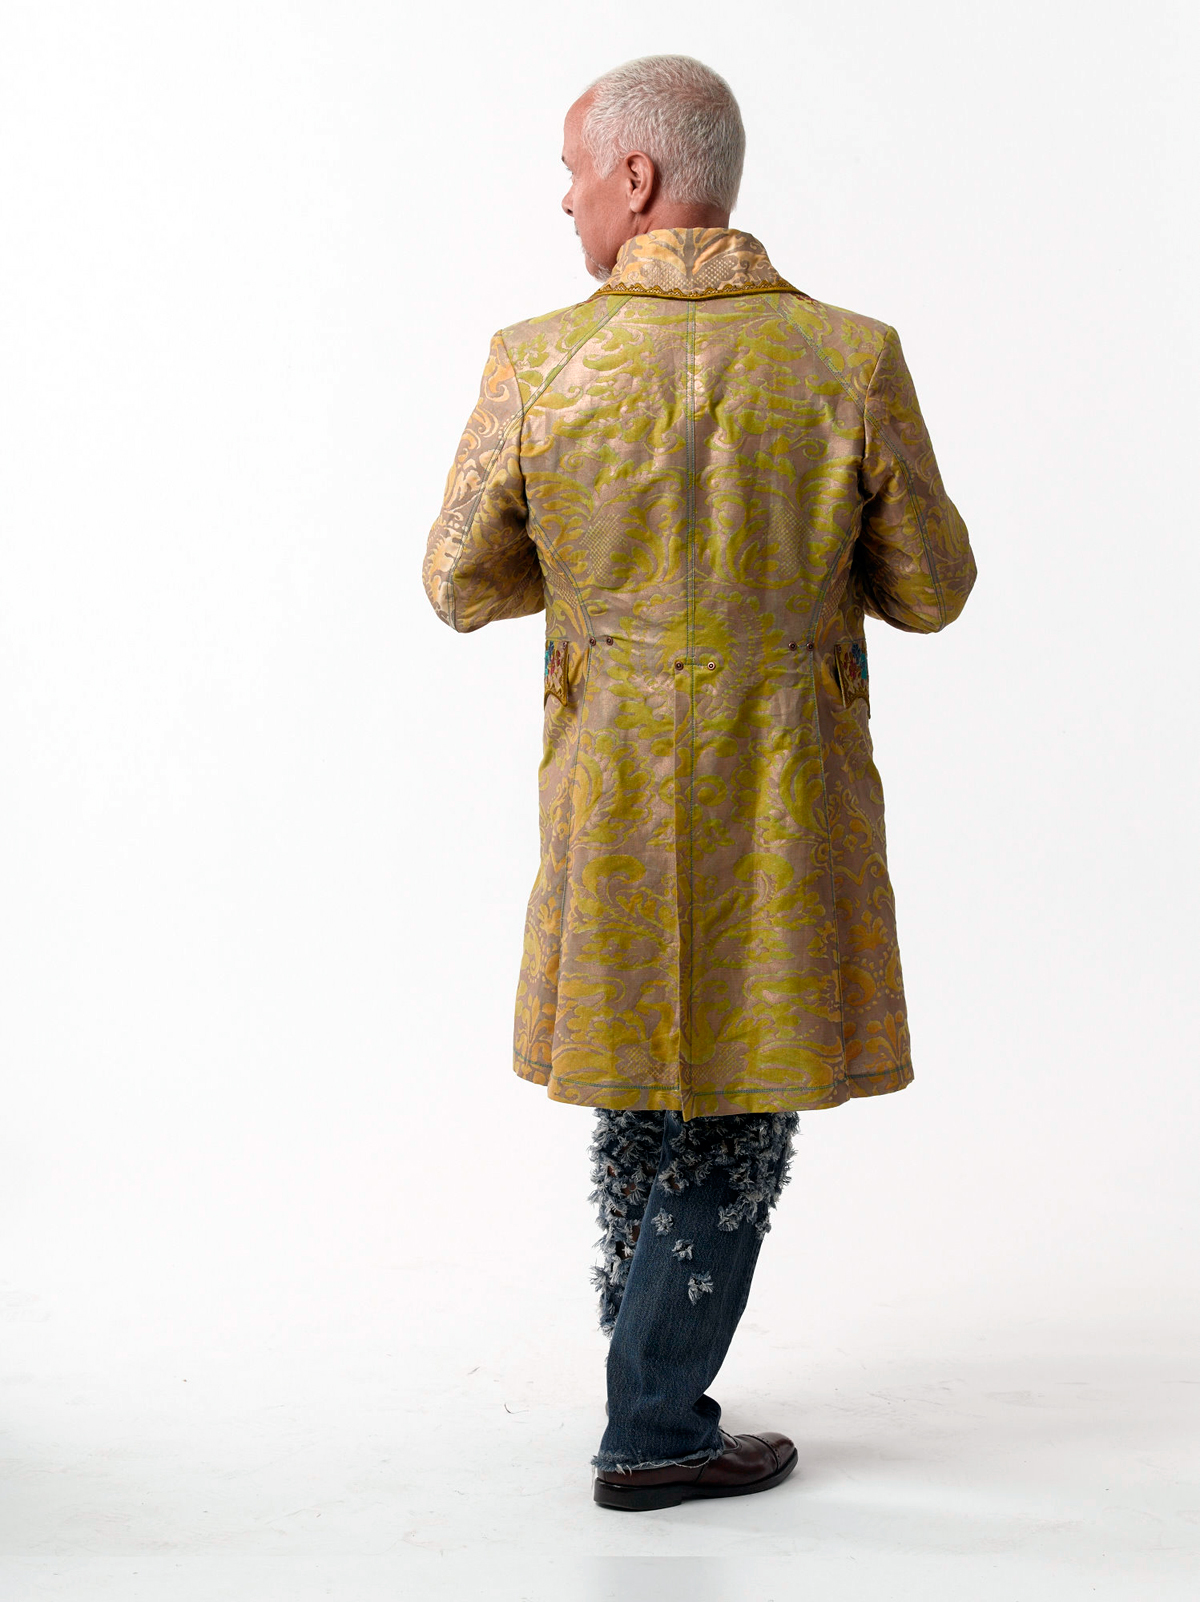 Finished Fortuny frock coat by Kenneth D. King